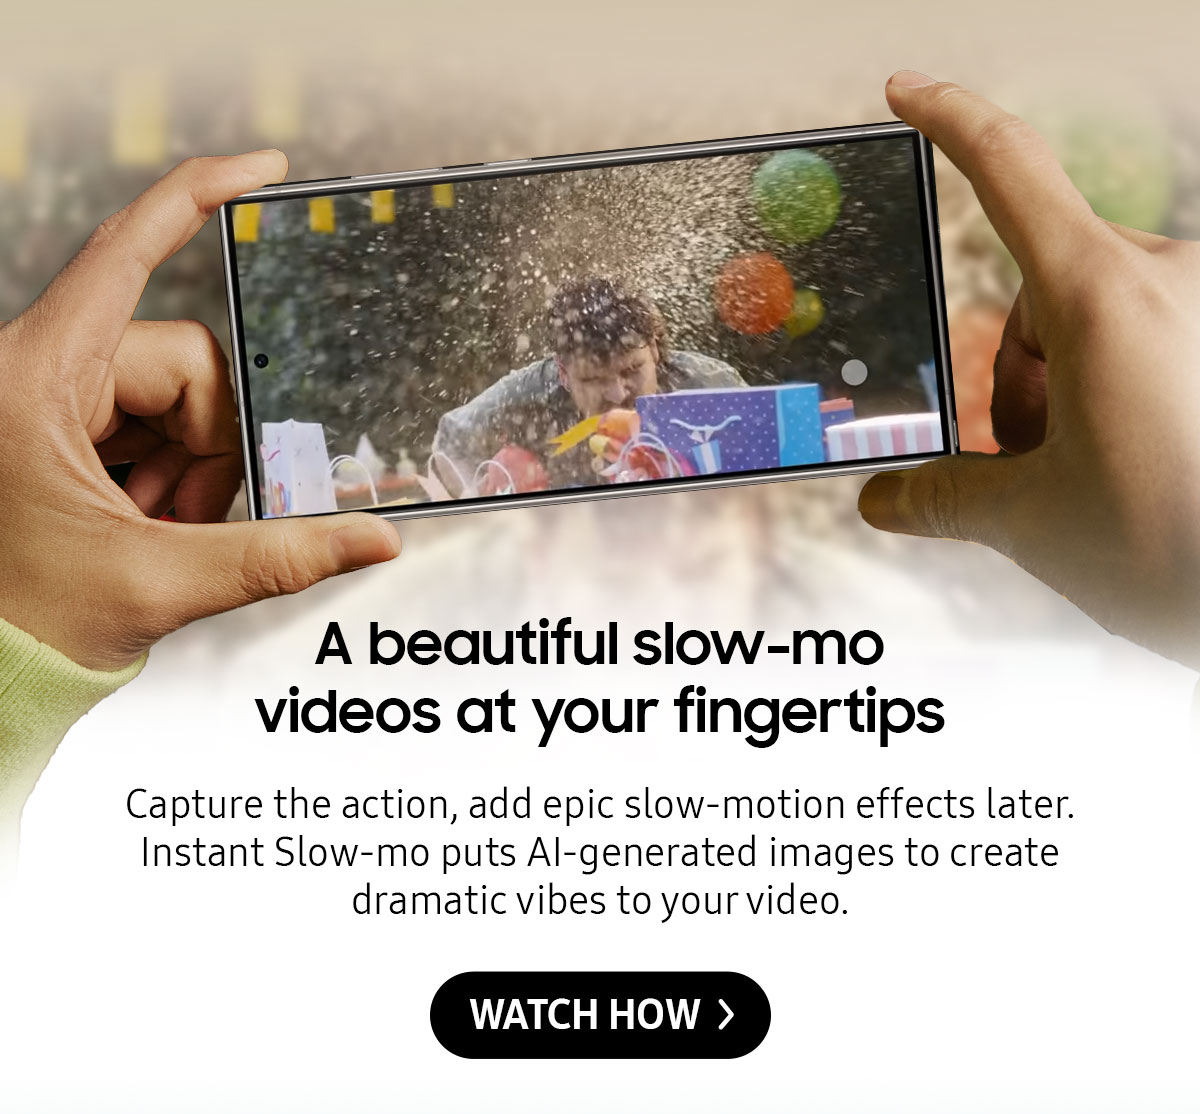 A beautiful slow-mo videos at your fingertips | Capture the action, add epic slow-motion effects later. Instant Slow-mo puts Al-generated images to create dramatic vibes to your video.